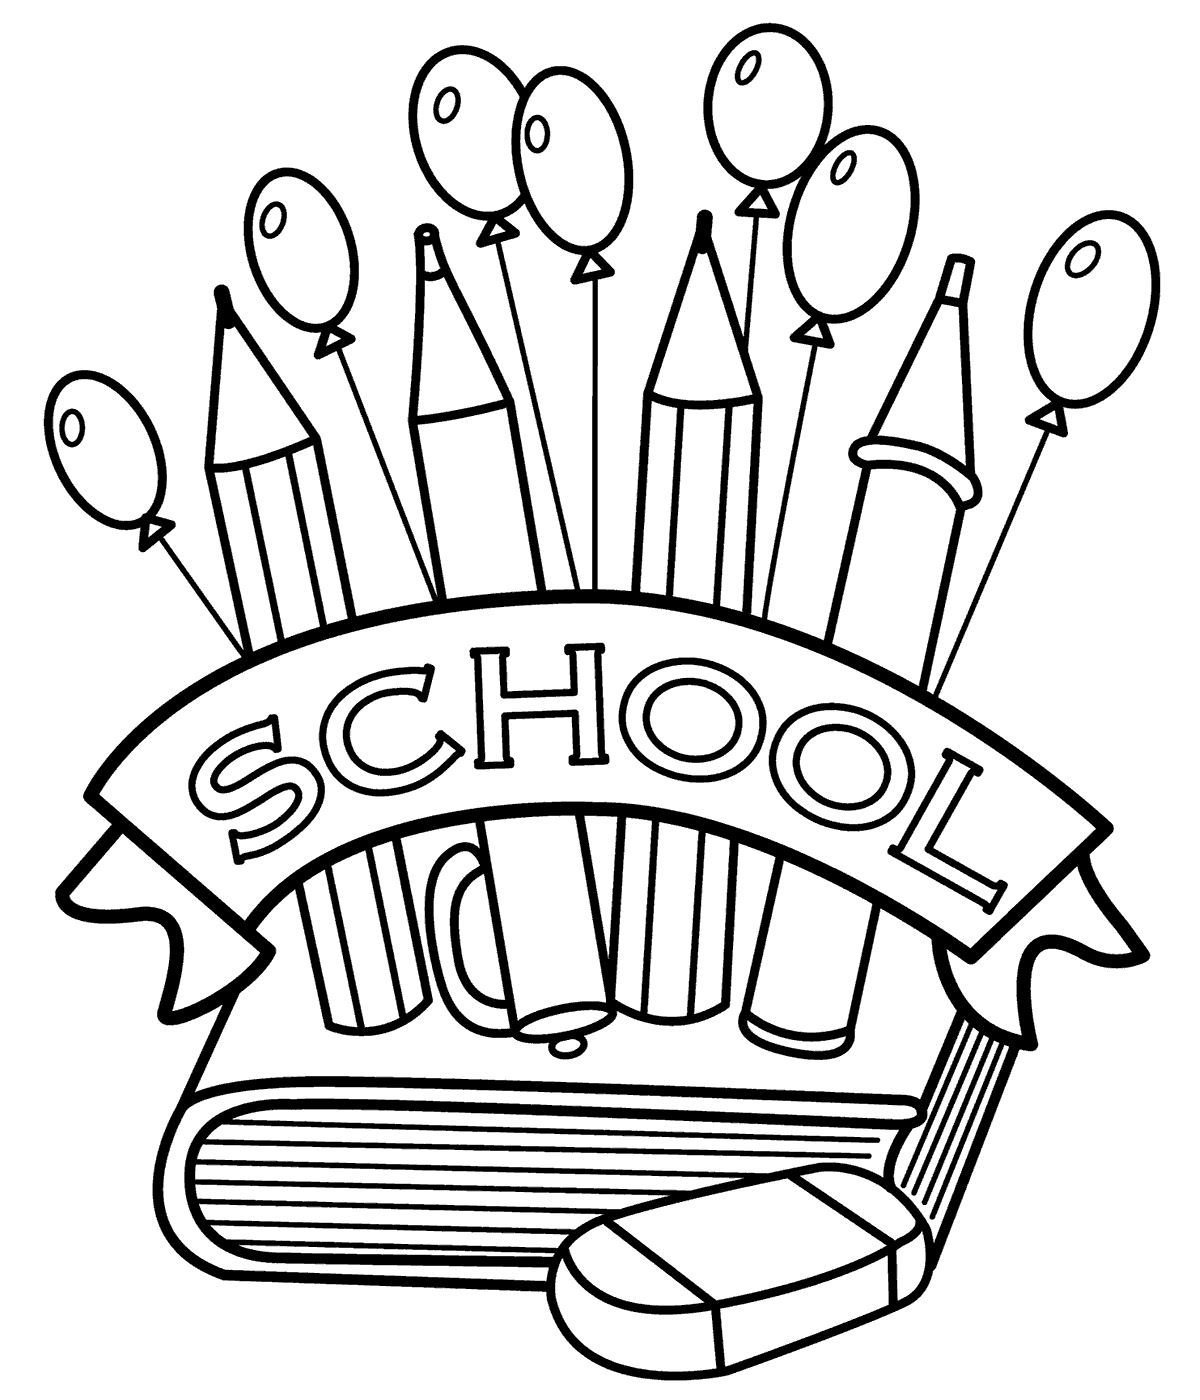 September Coloring Sheets For Kids Coloring Pages